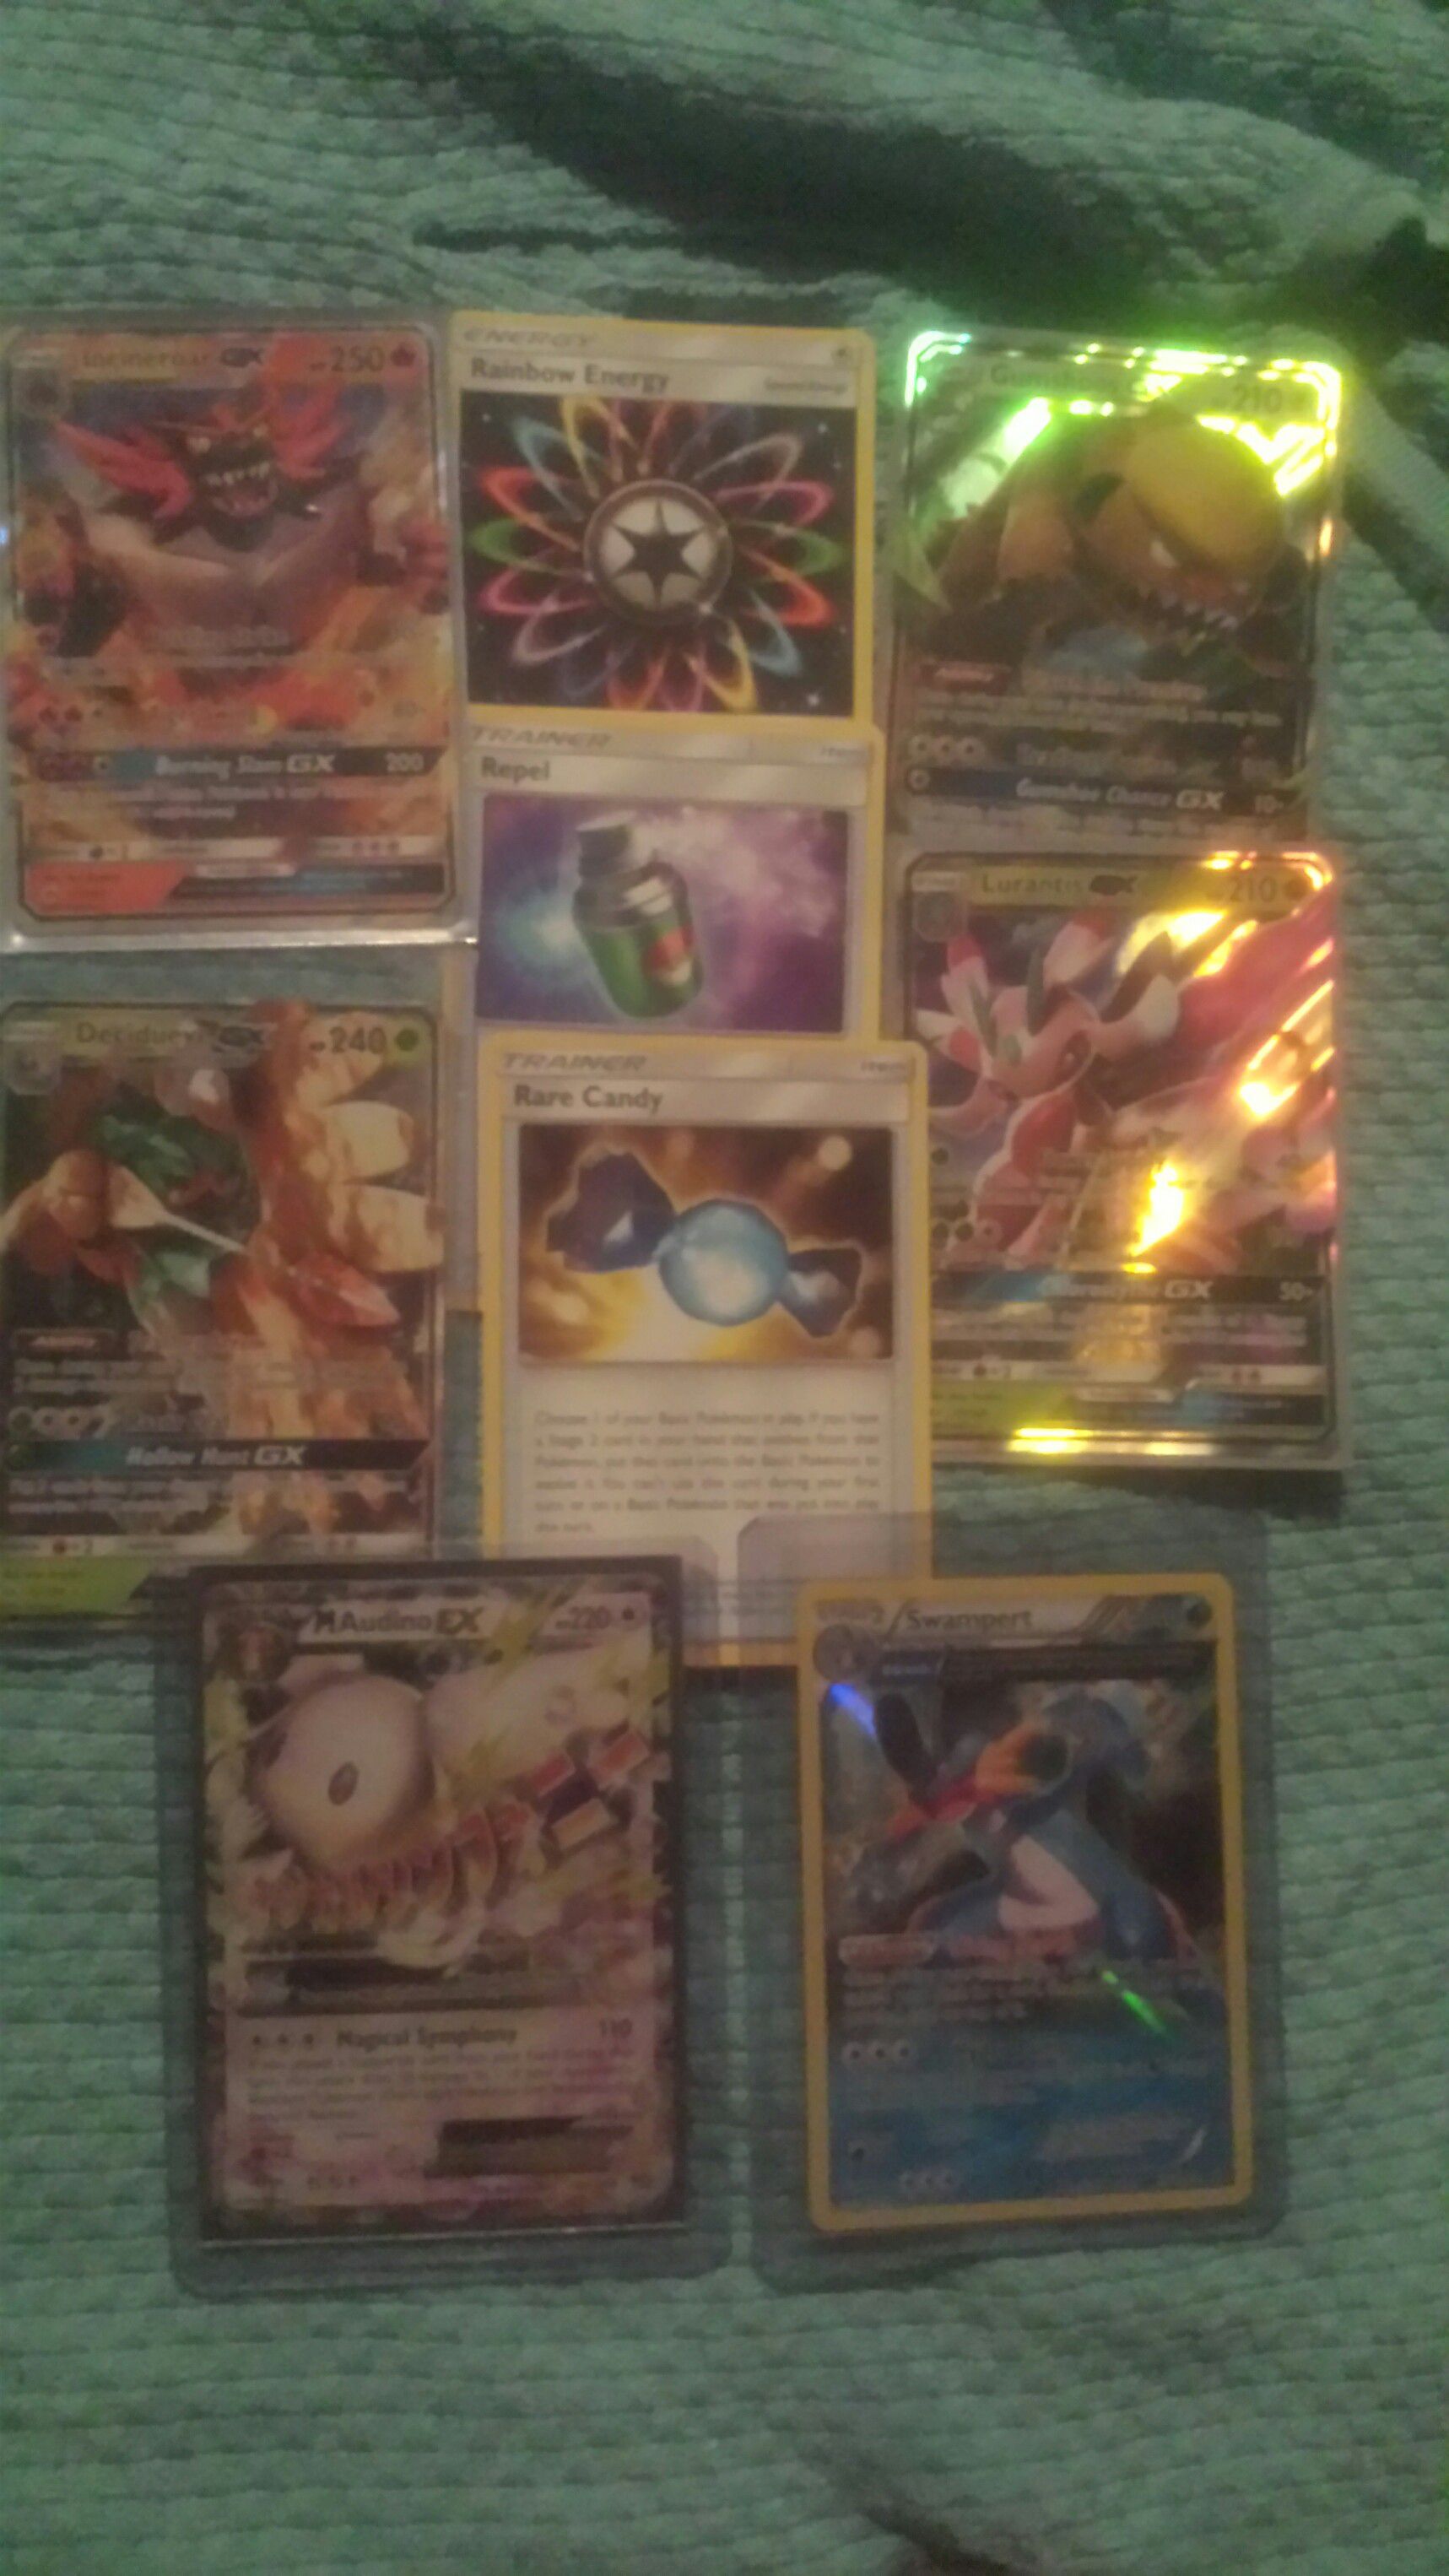 GX and EX Pokemon cards trainer cards